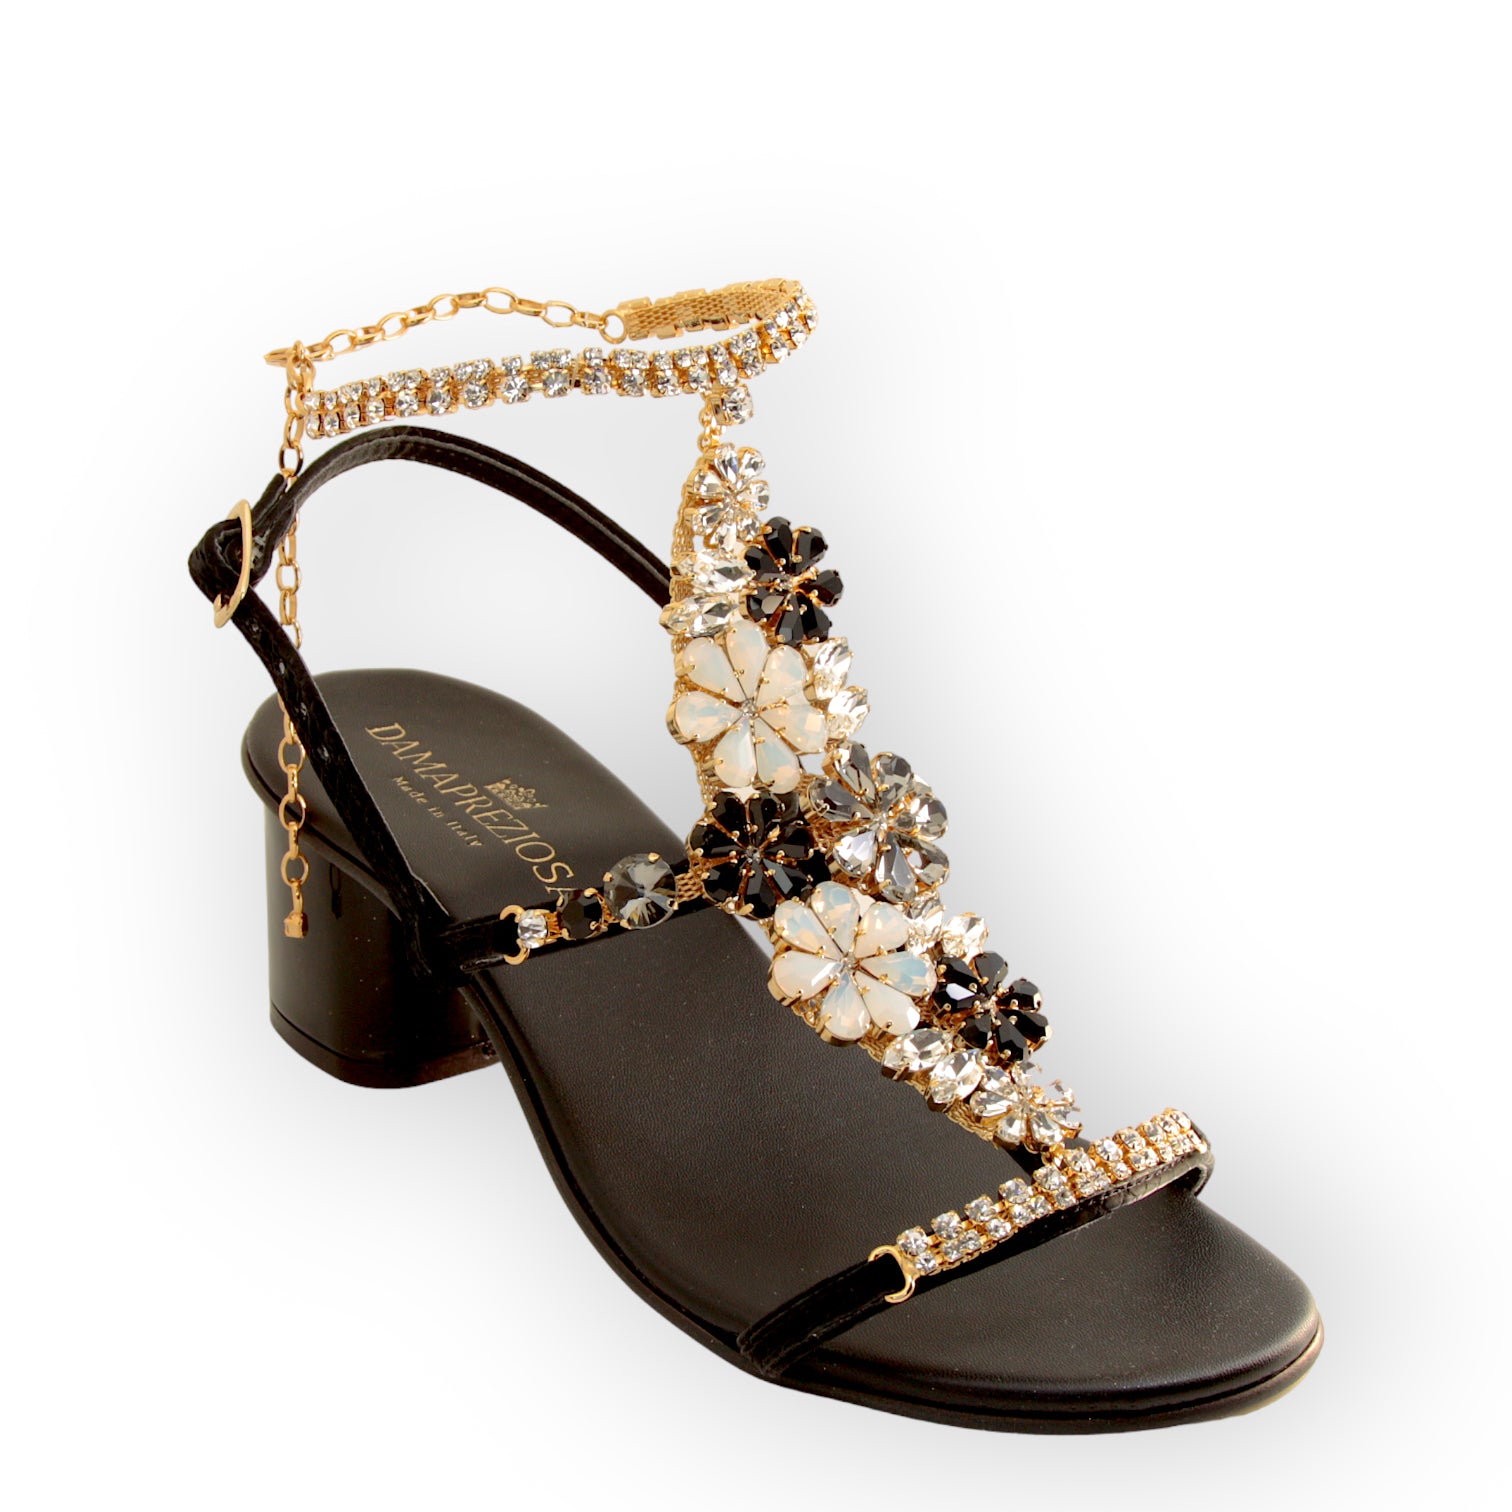 Daisy black and withe crystals embellished sandal